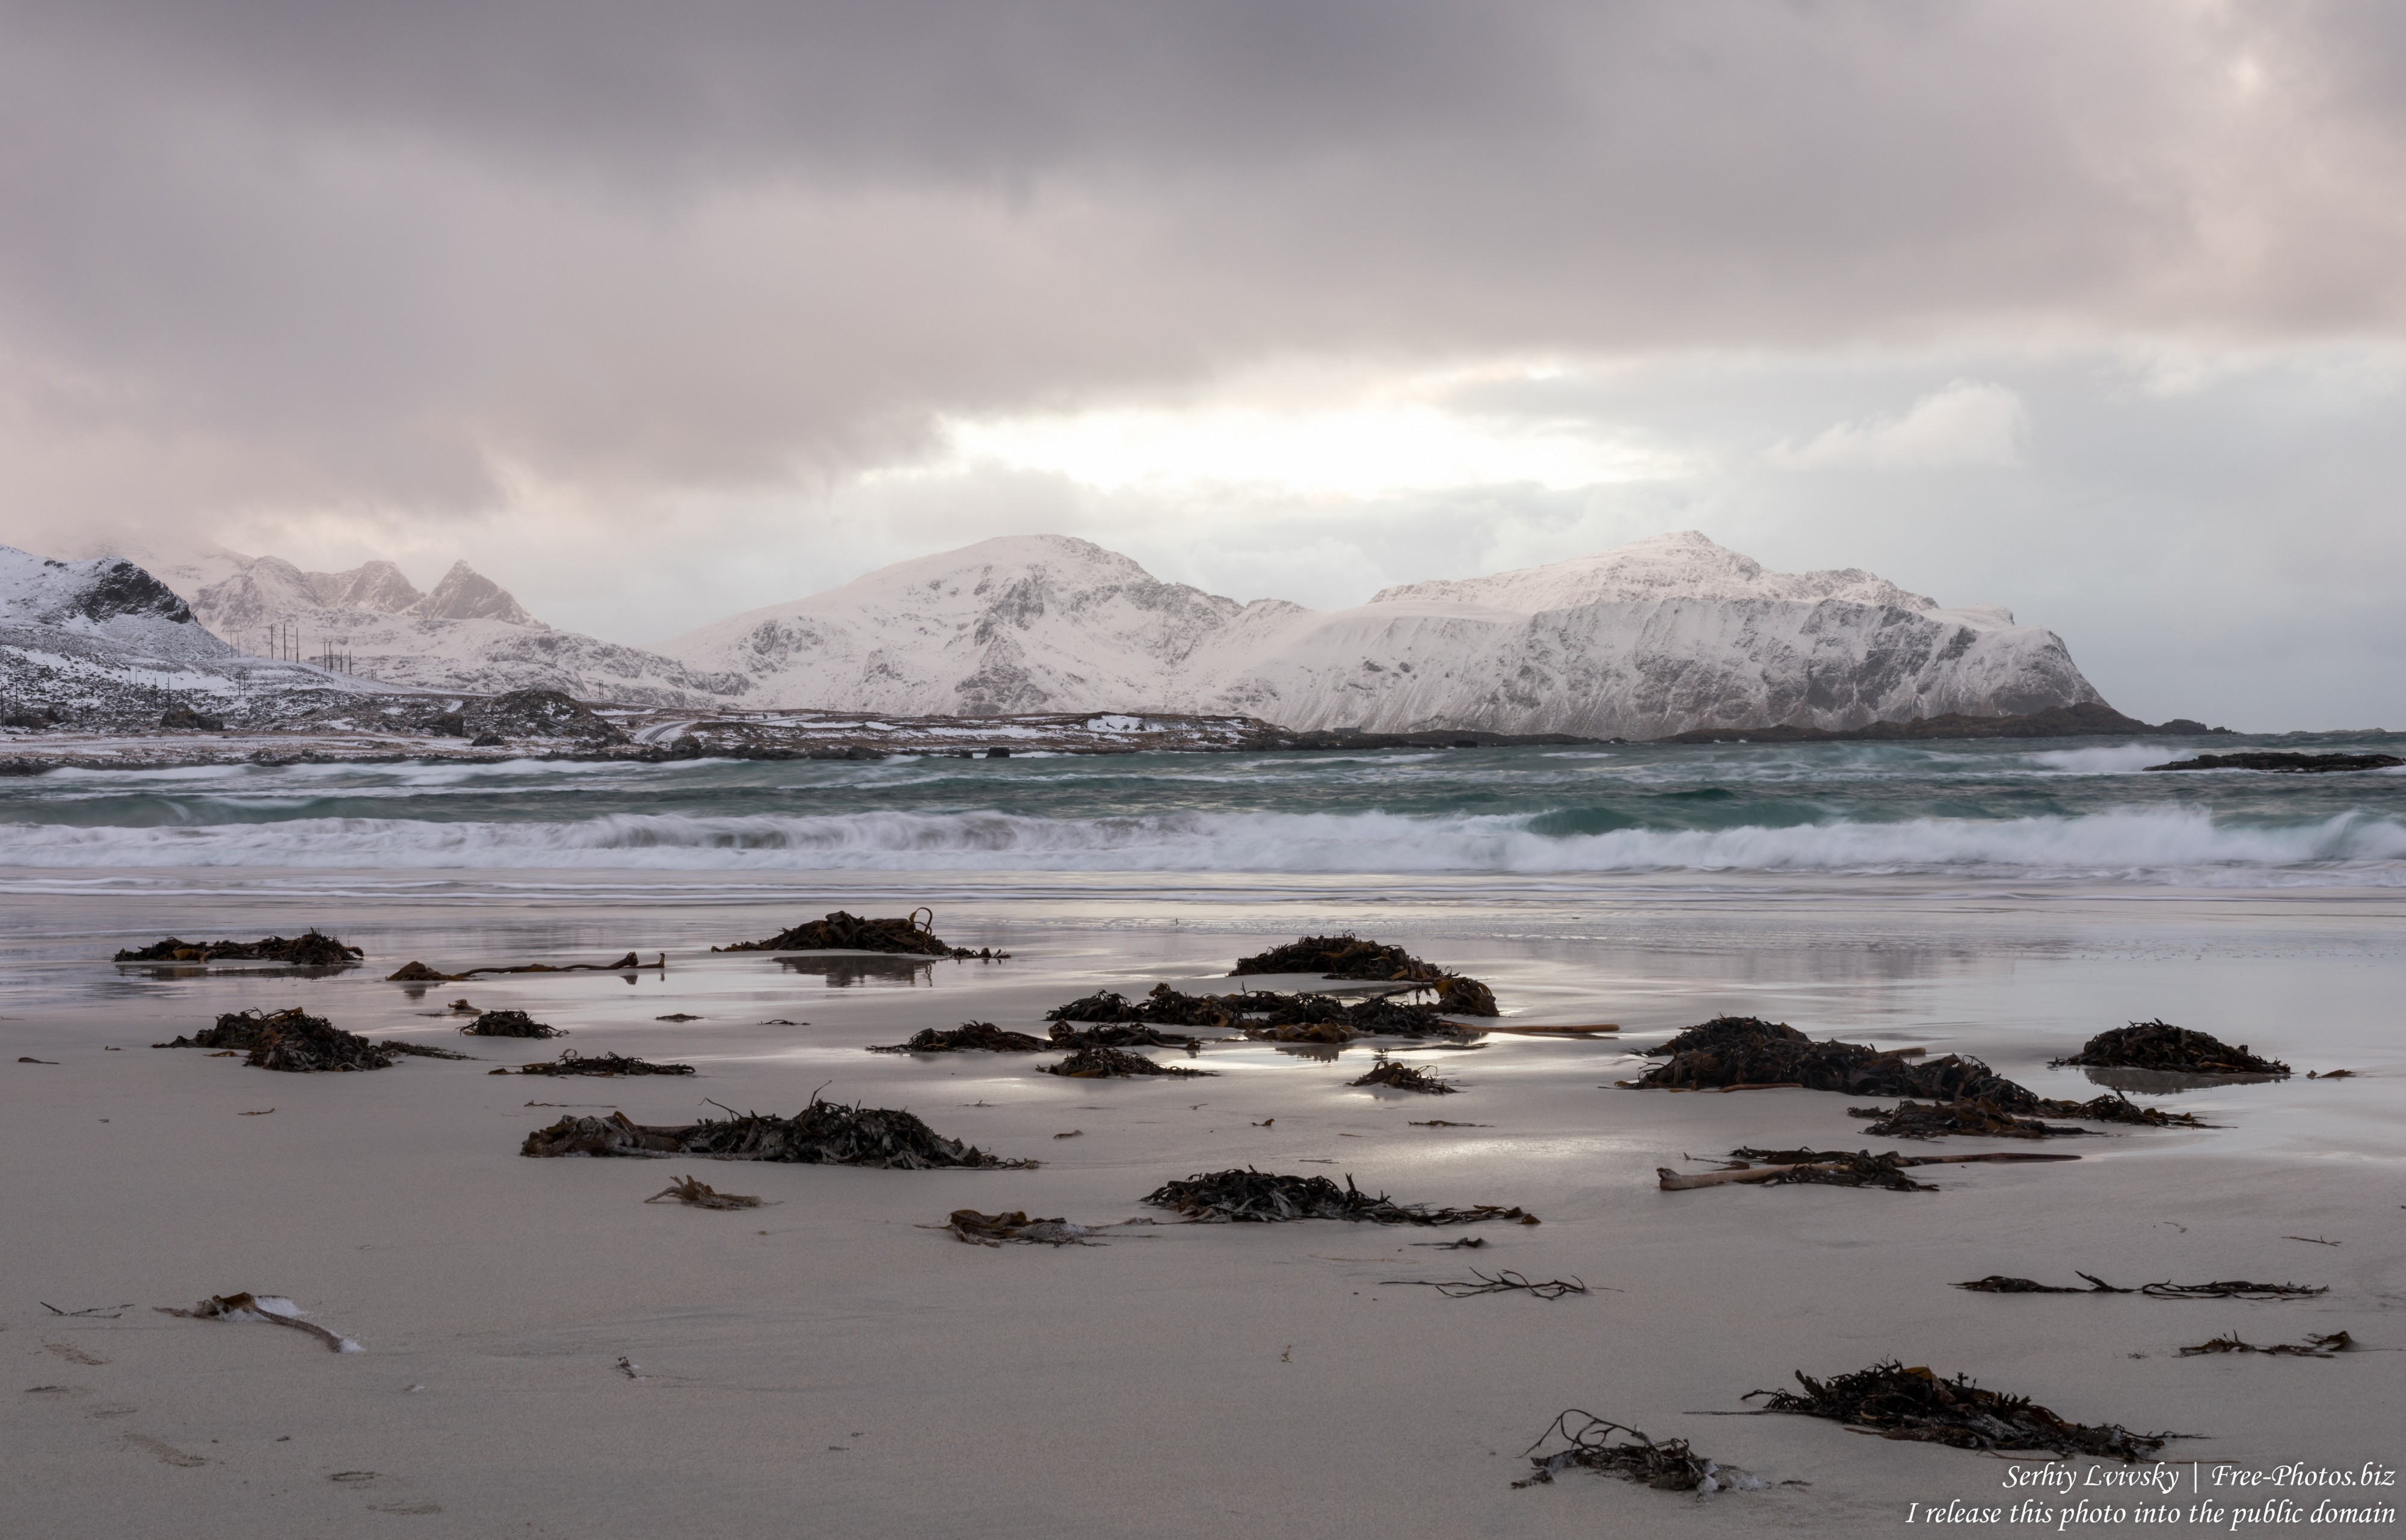 Skagsanden beach, Norway, photographed in February 2020 by Serhiy Lvivsky, picture 5